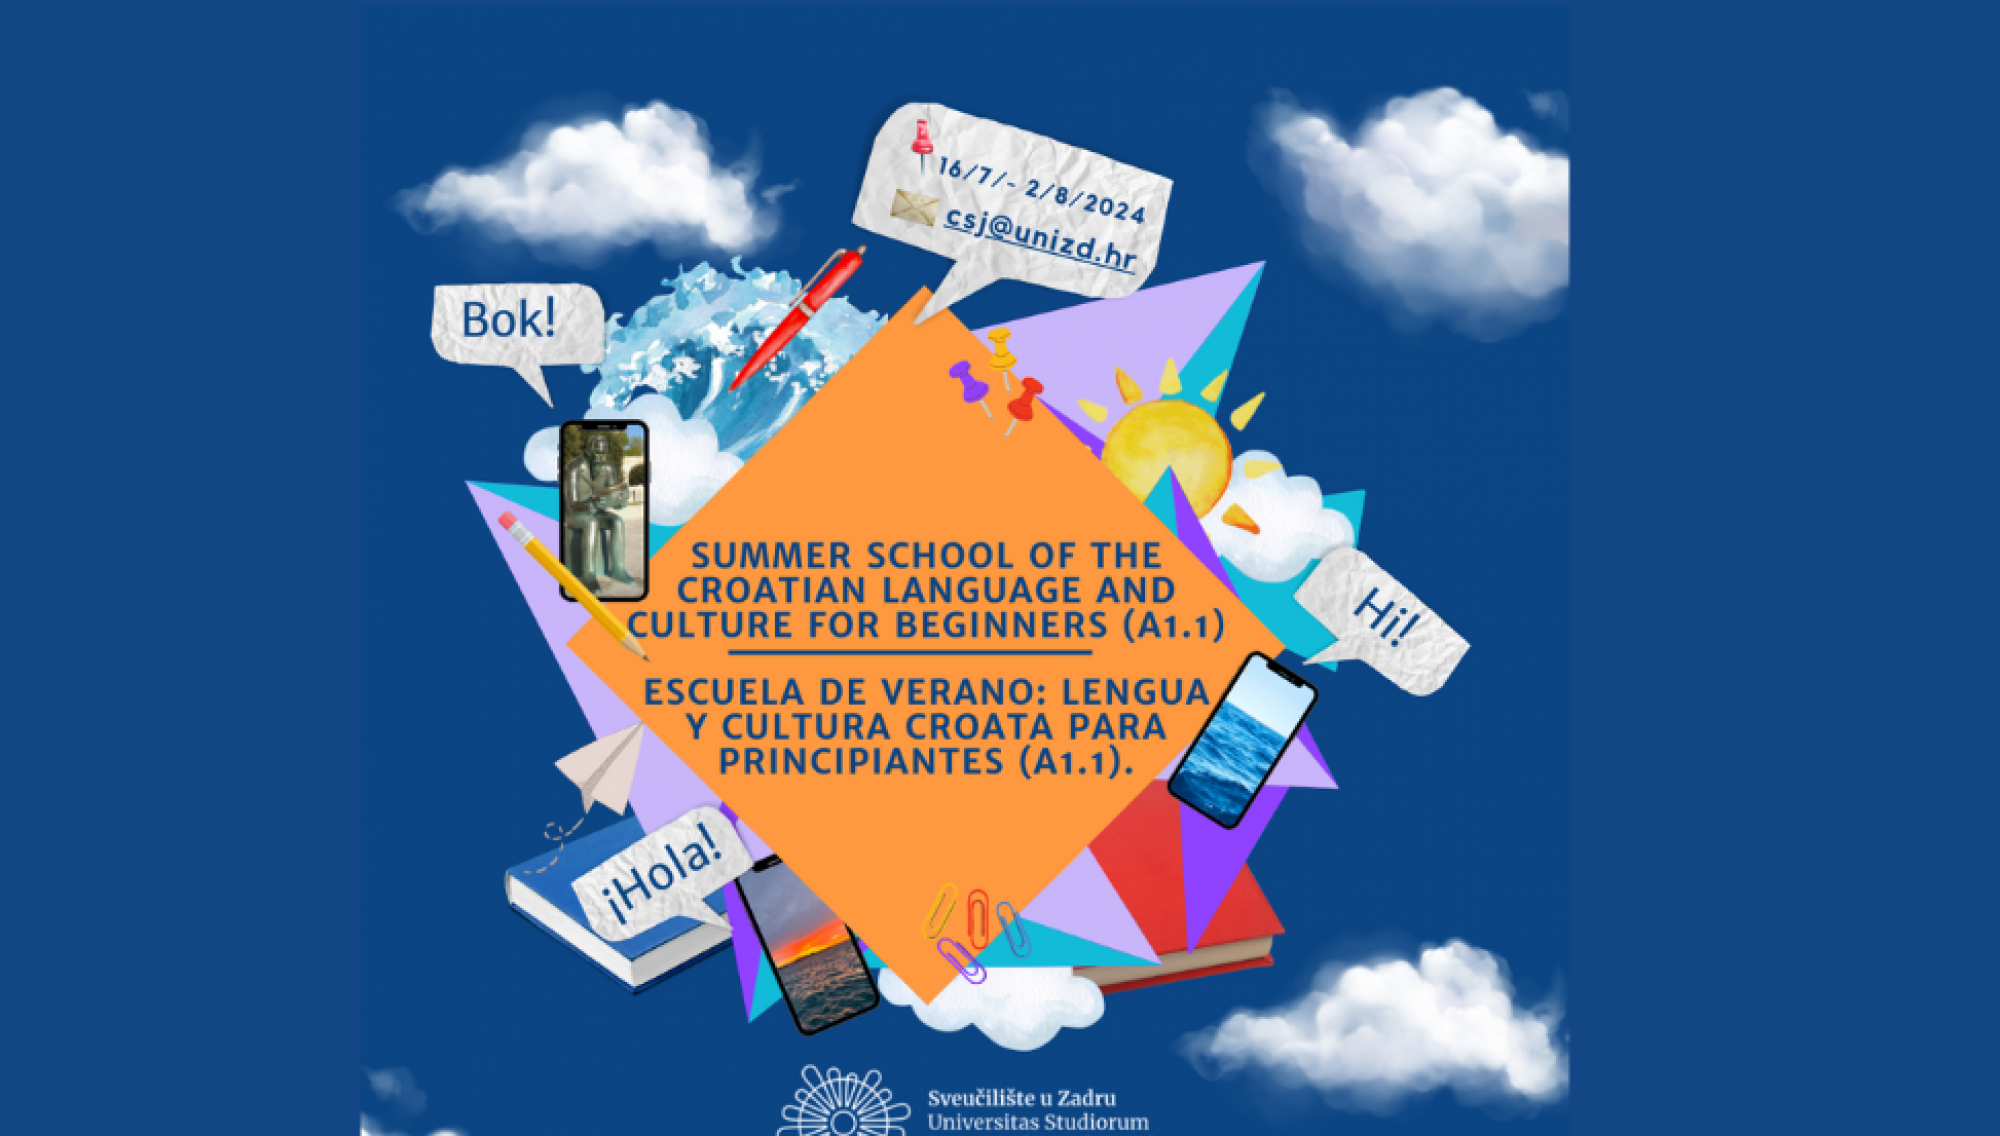 SUMMER SCHOOL OF THE CROATIAN LANGUAGE AND CULTURE FOR BEGINNERS (A1.1)